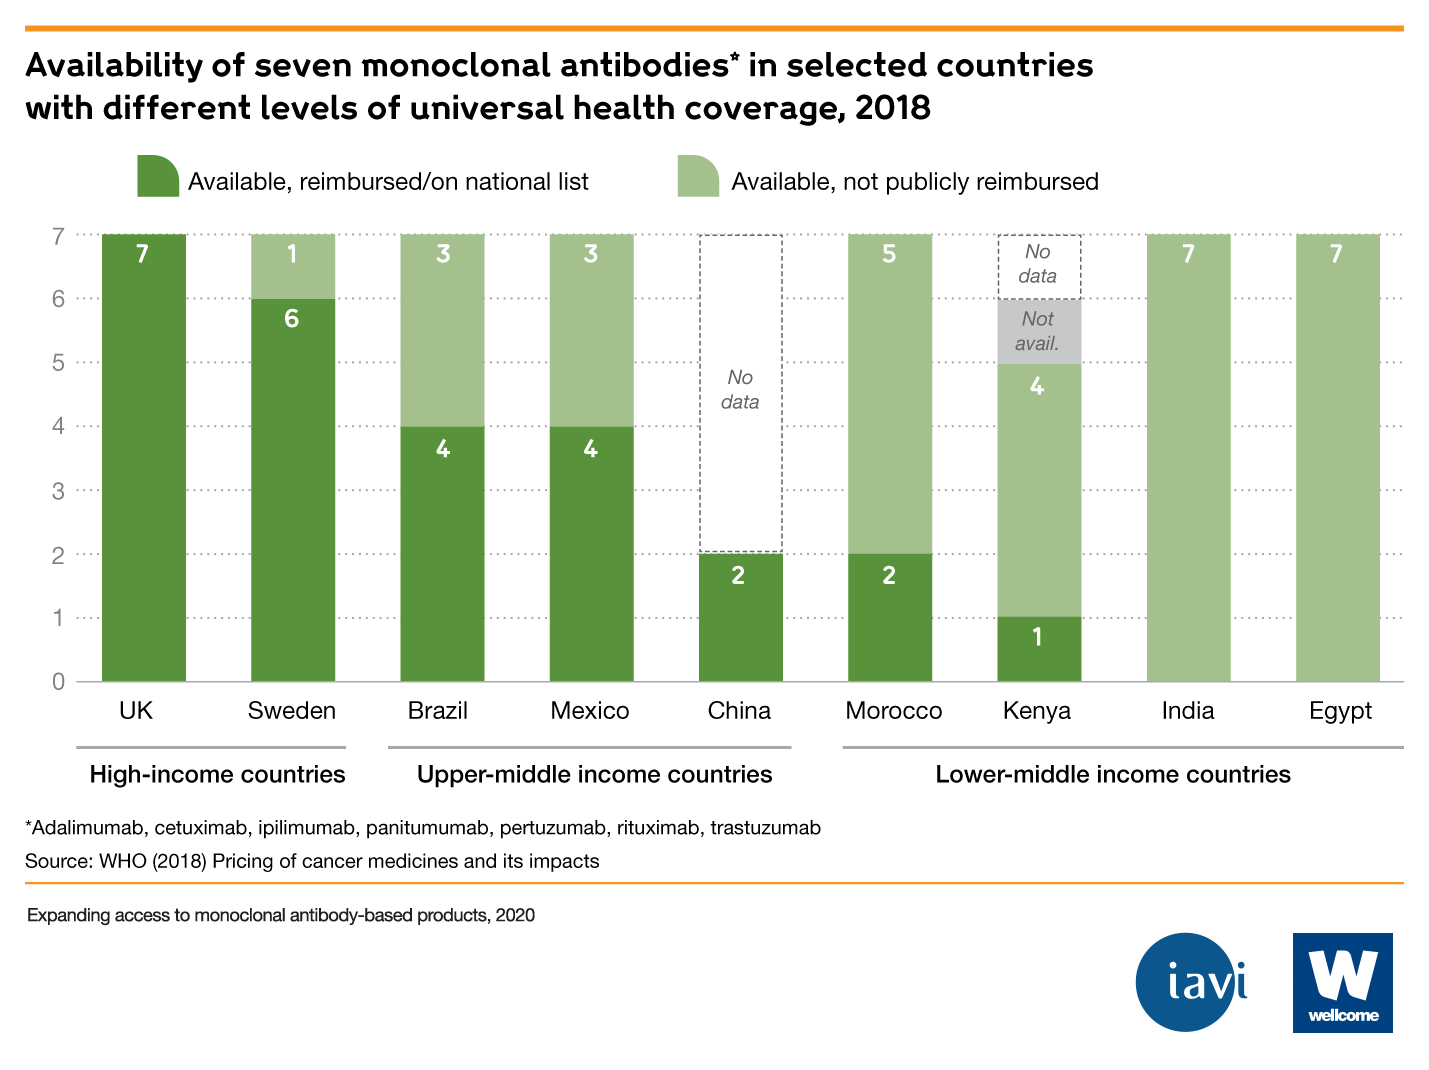 Chart showing the availability of seven monoclonal antibodies in selected countries with different levels of universal health coverage, 2018